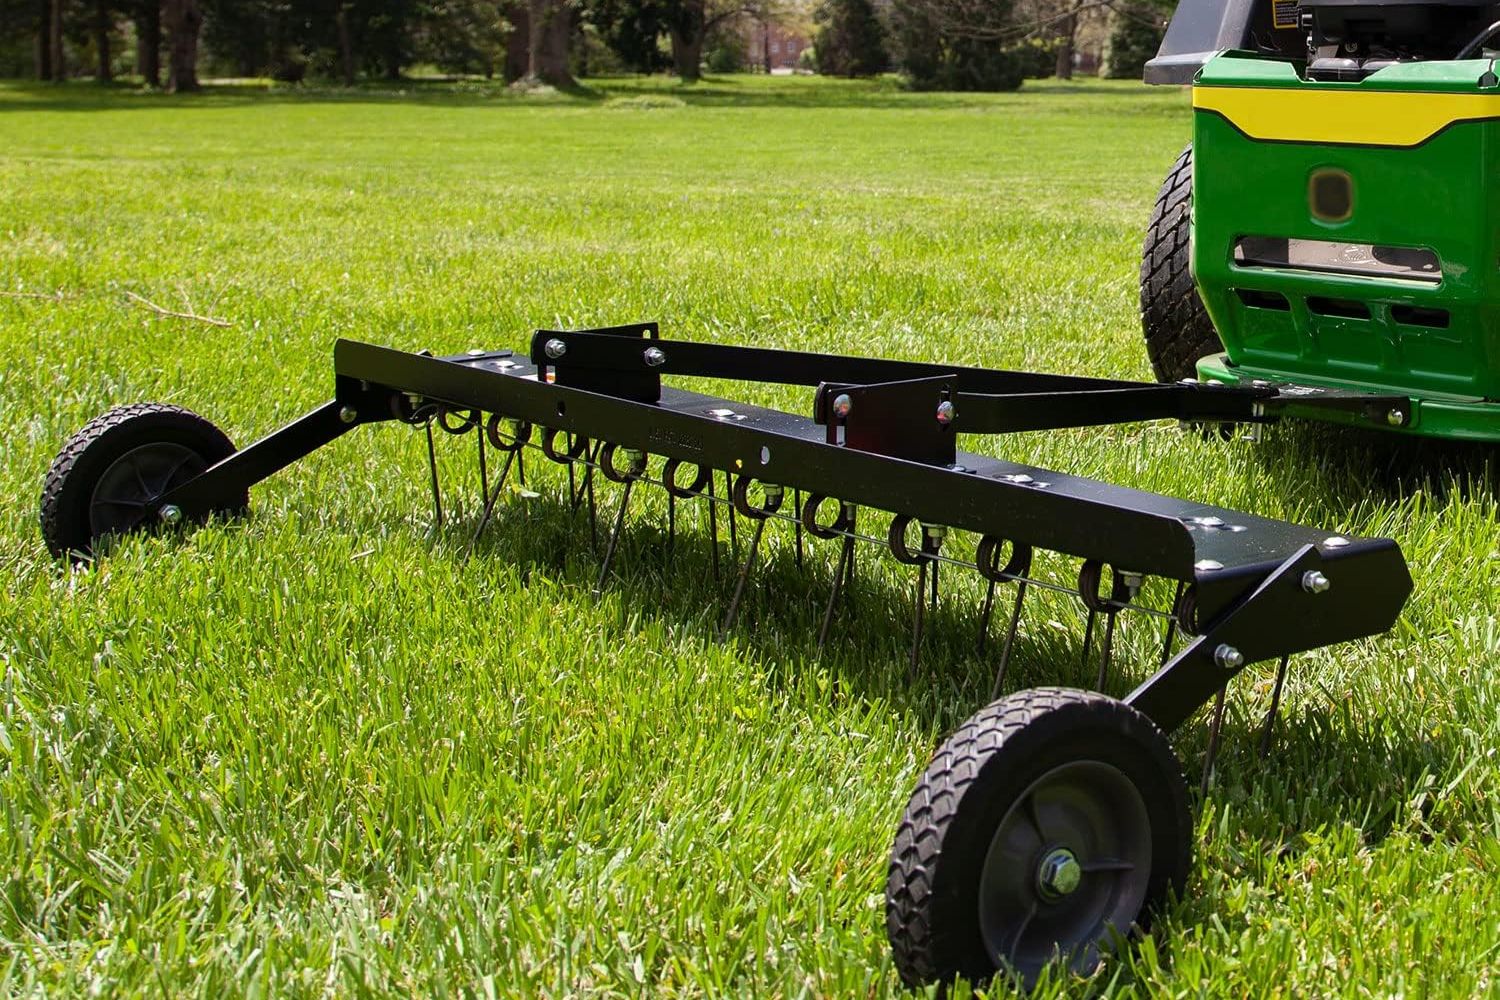 7 Common Lawn Problems That Are a Real Pain in the Grass